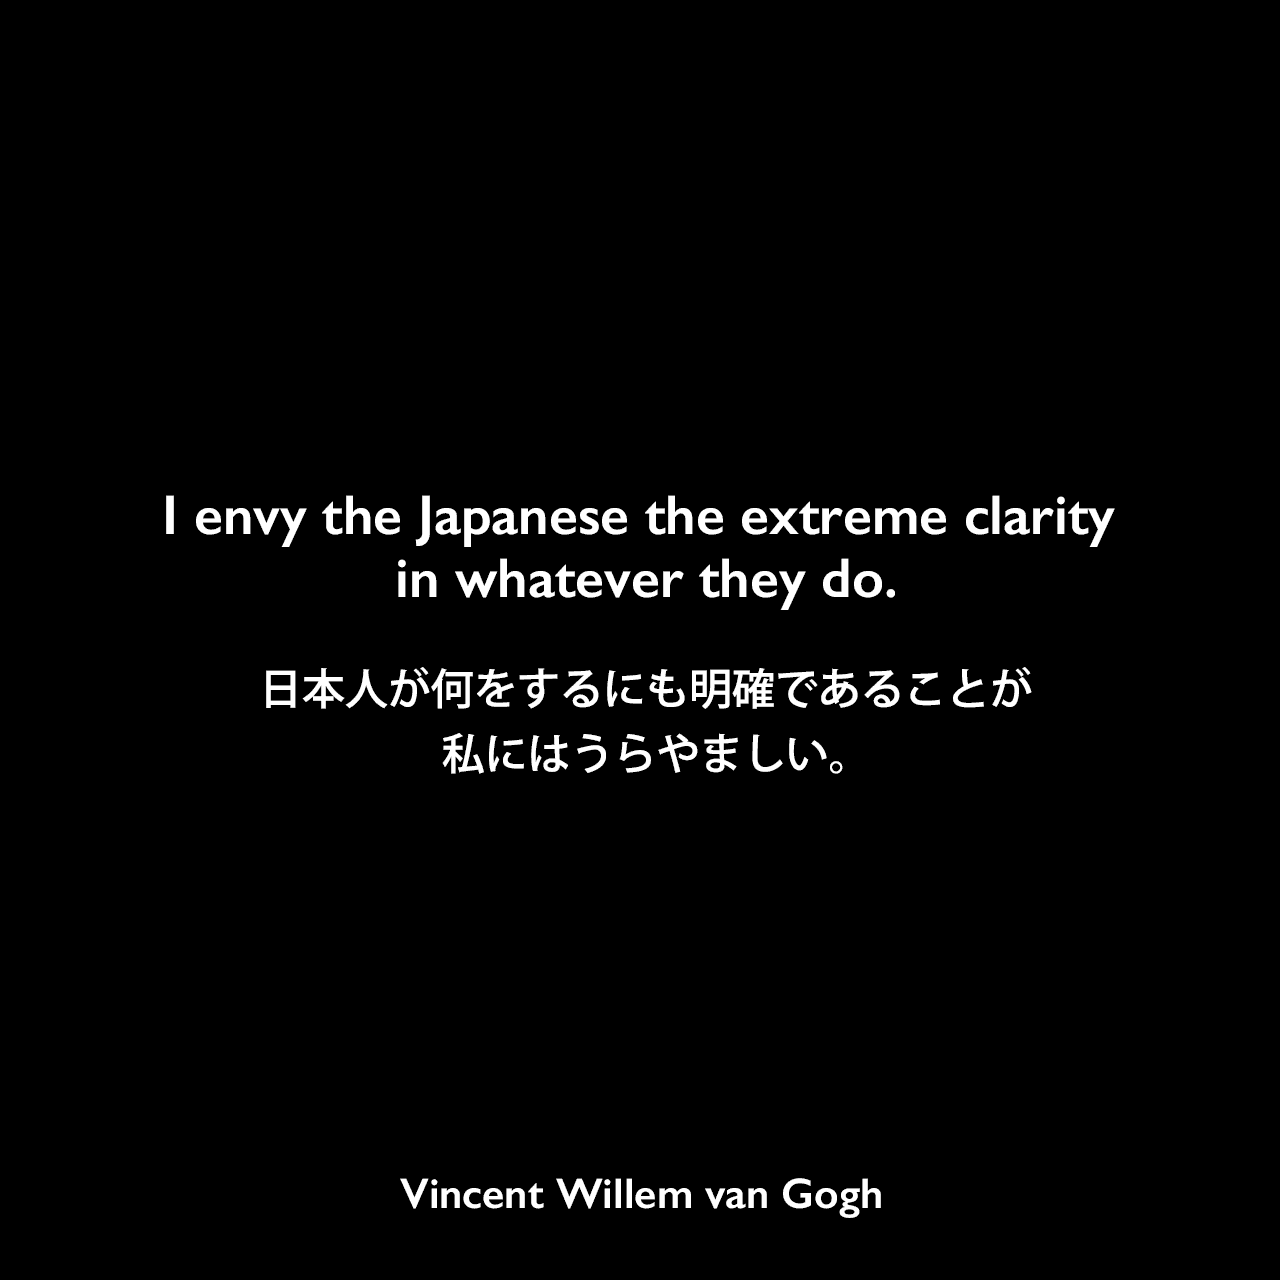 I envy the Japanese the extreme clarity in whatever they do.日本人が何をするにも明確であることが、私にはうらやましい。Vincent Willem van Gogh